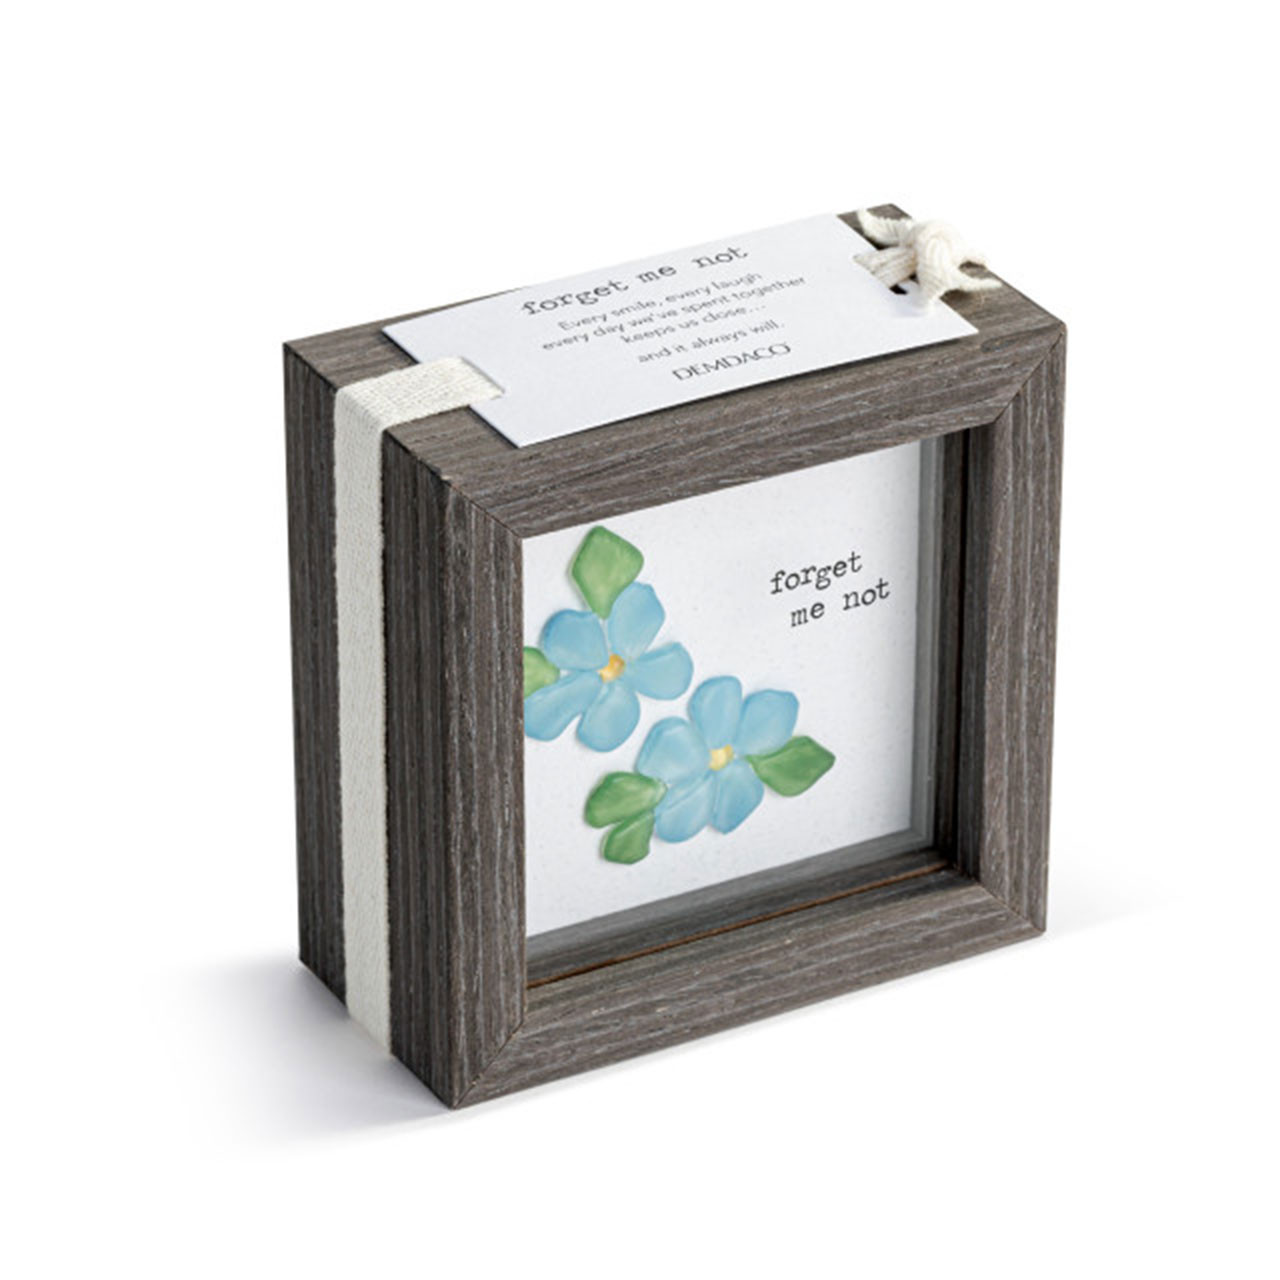 Packaging of the Forget Me Not Mini Shadow Box